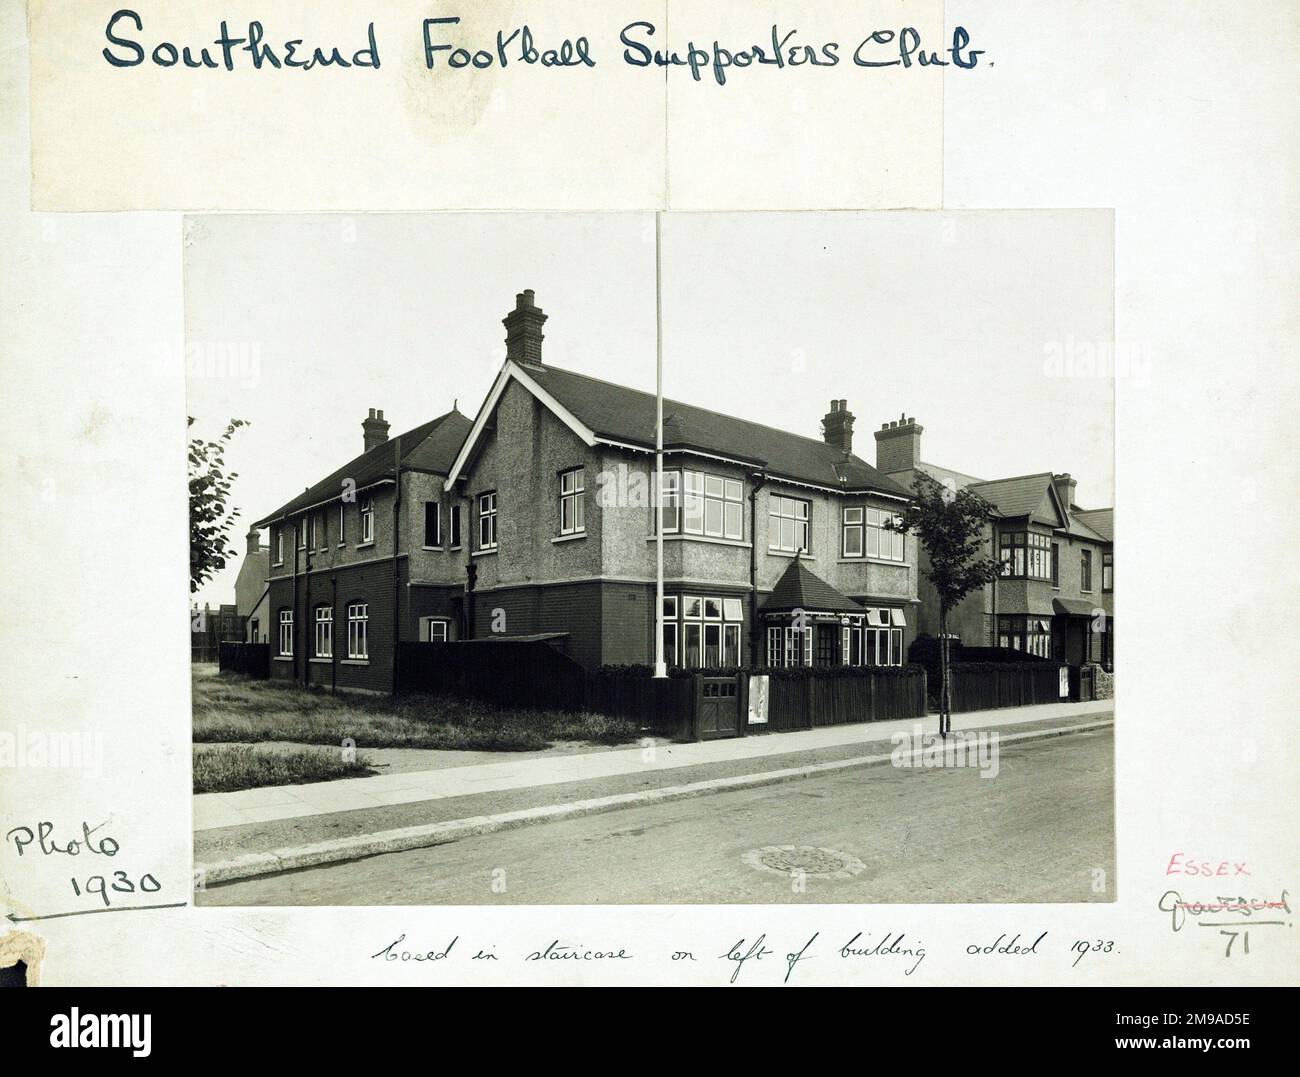 Photograph of Southend FC Supporters Club, Southend, Essex. The main side of the print (shown here) depicts: Left Face on view of the pub.  The back of the print (available on request) details: Trading Record 1923 . 1953 for the Southend FC Supporters Club, Southend, Essex SS1 2RF. As of July 2018 . Renamed Windermere Club . private members club Stock Photo